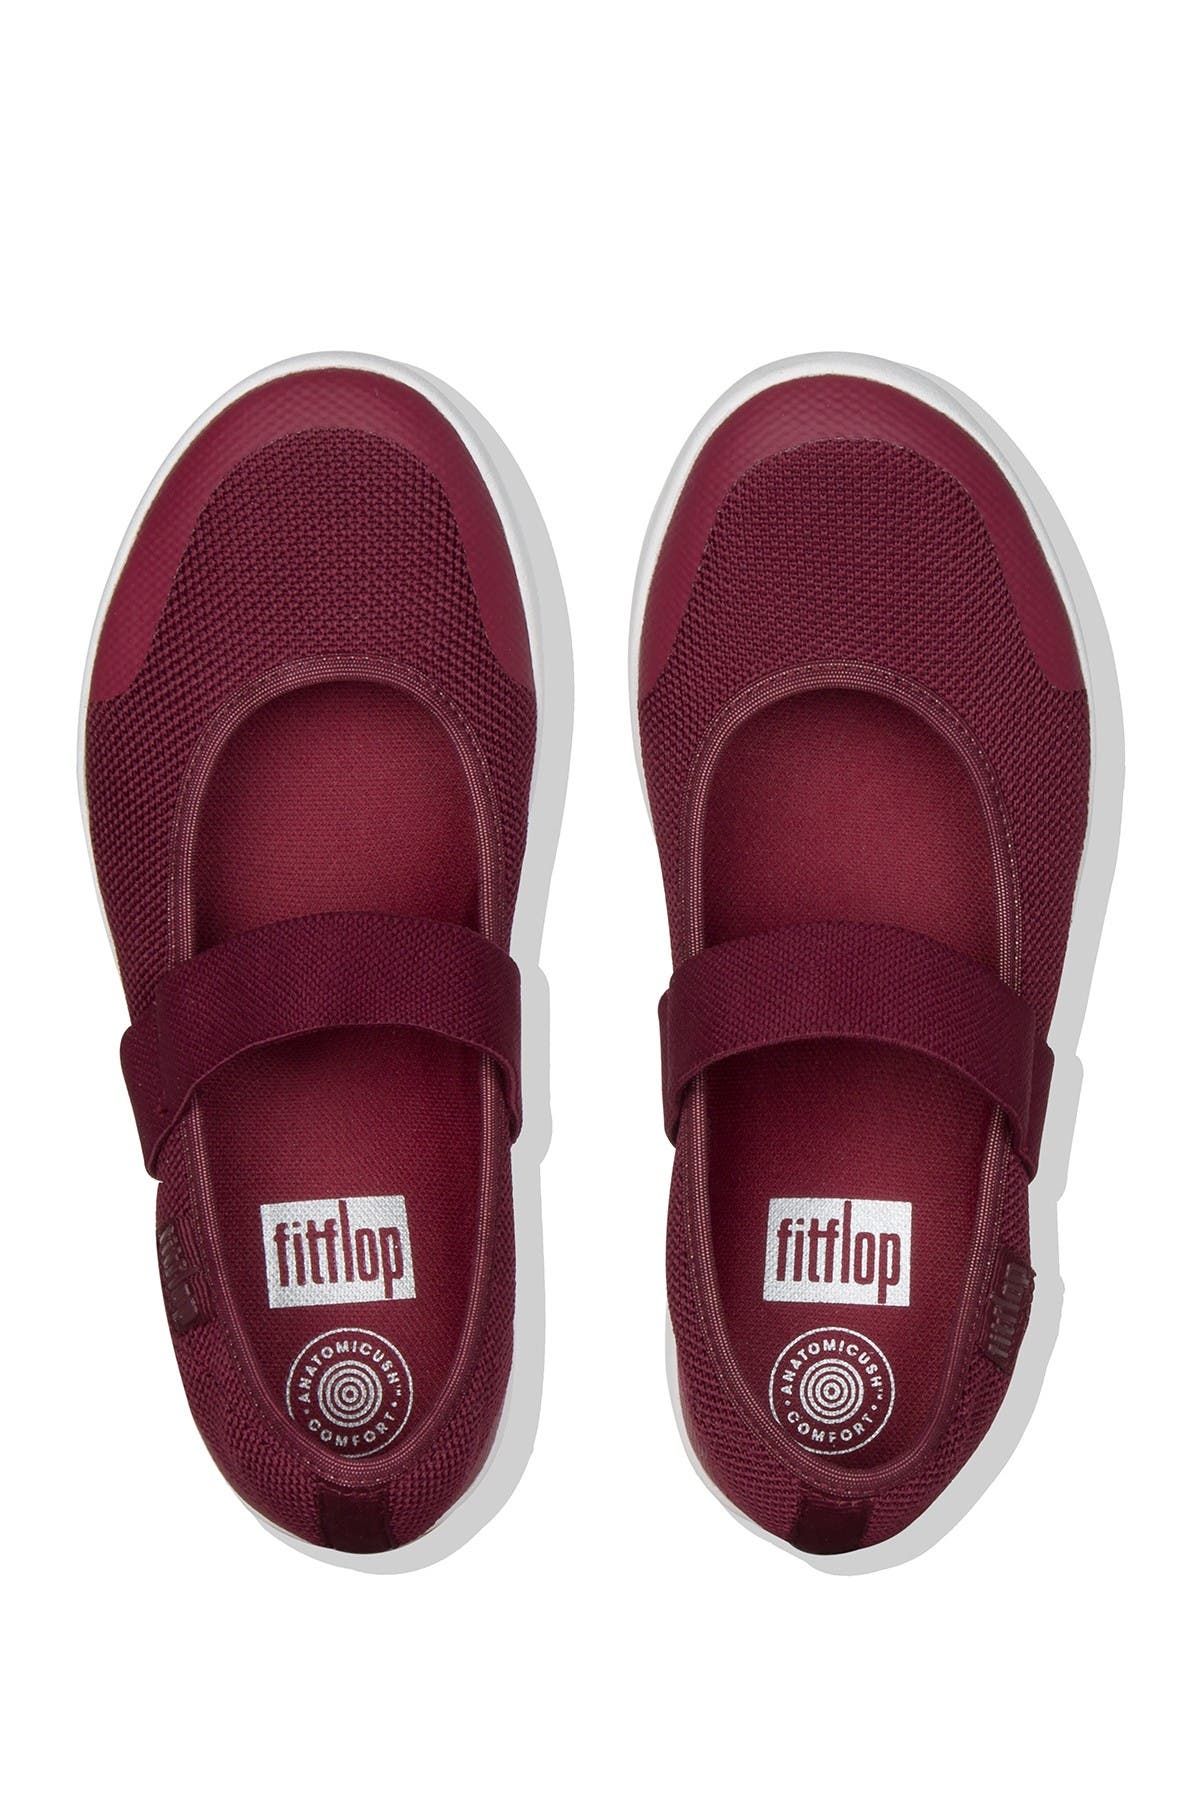 Fitflop Uberknit Mary Jane Flat In Bright Red